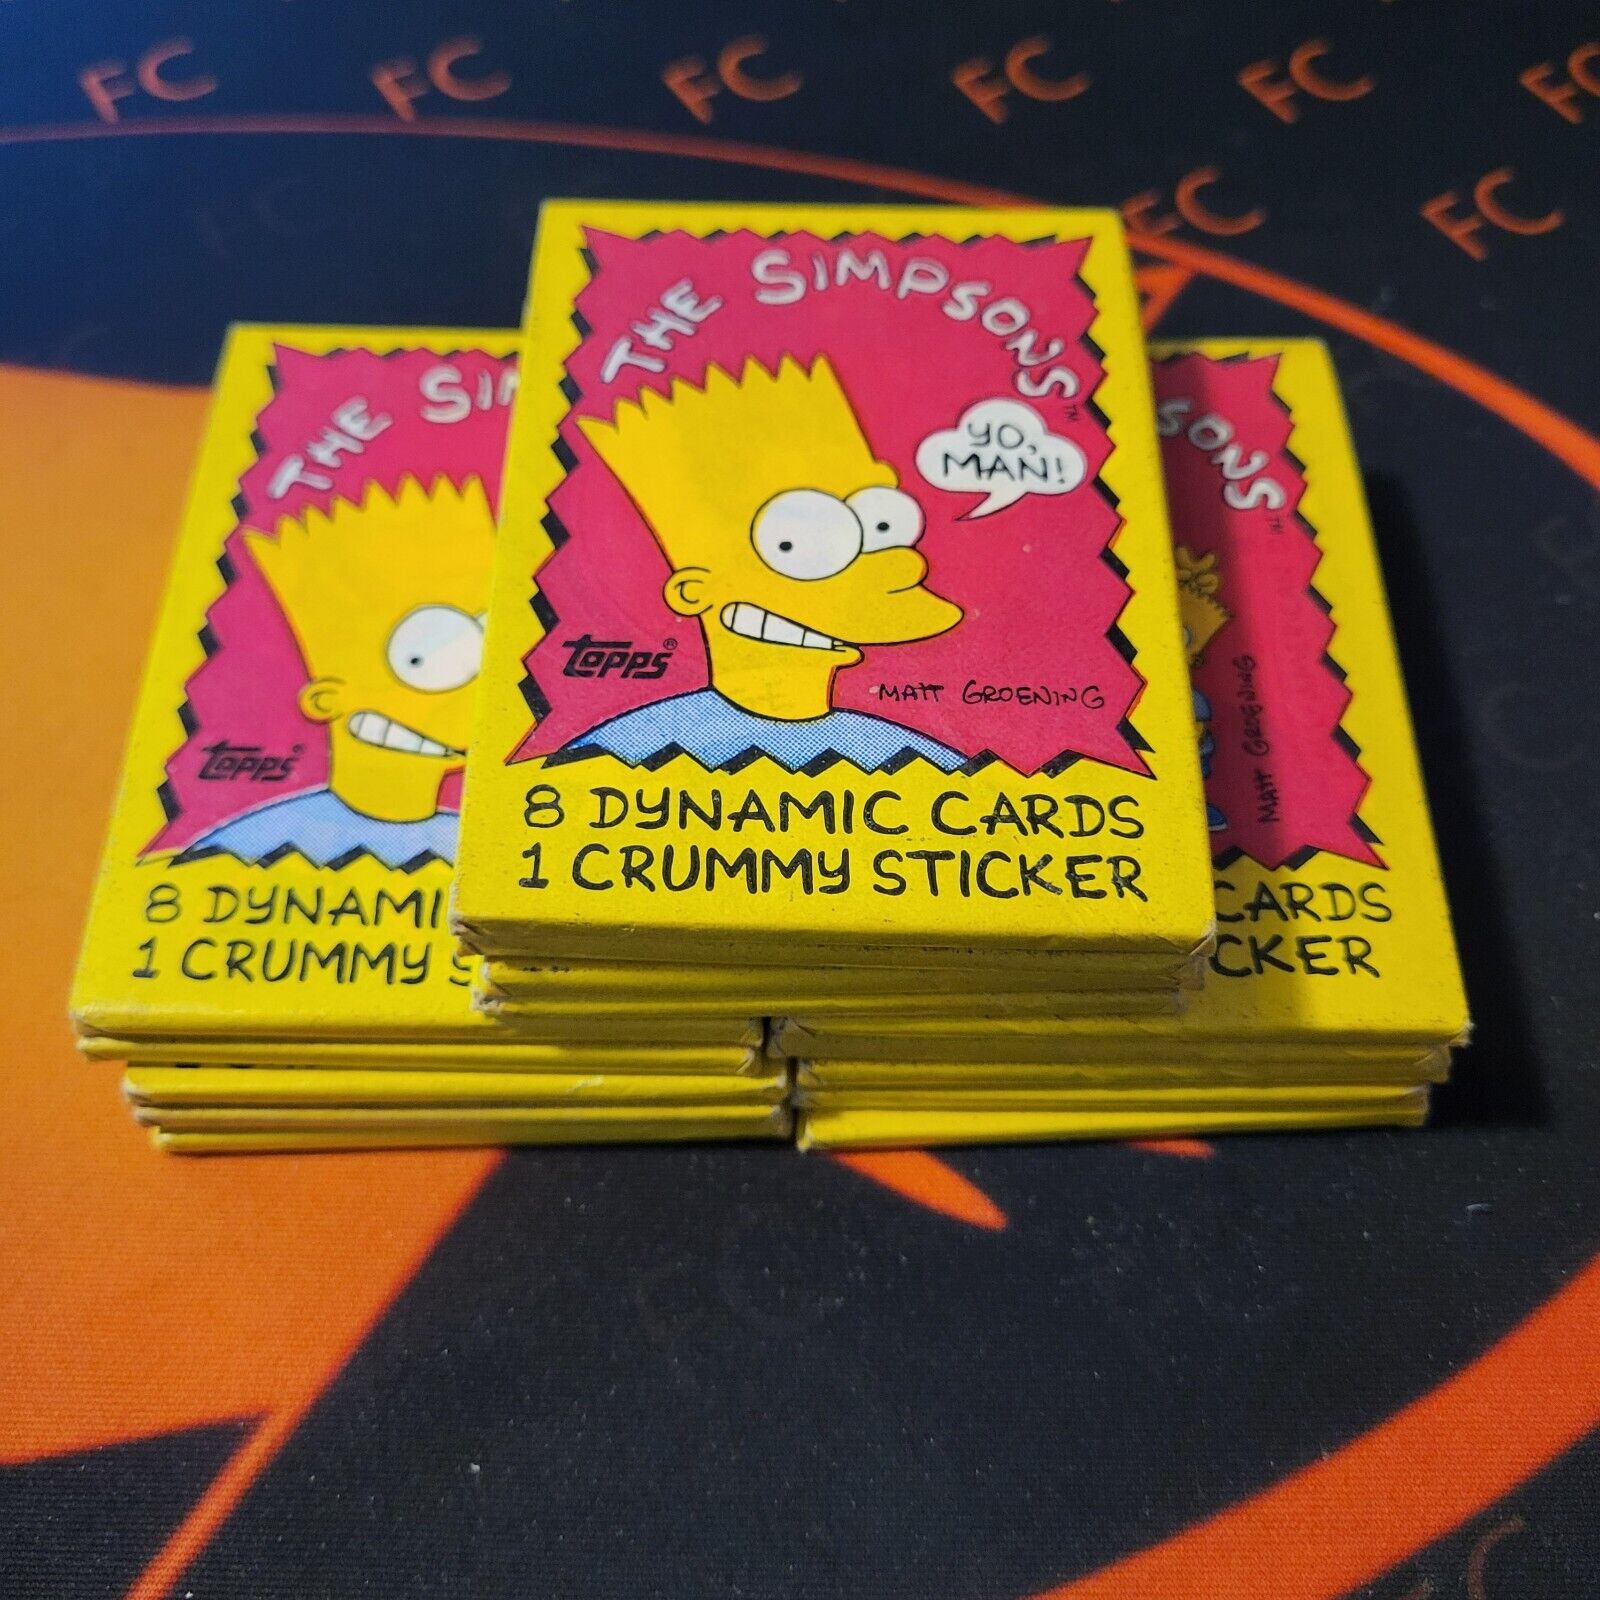 (14) Wax Pack Lot - 1990 Topps The Simpsons Trading Cards Sealed Wax Packs